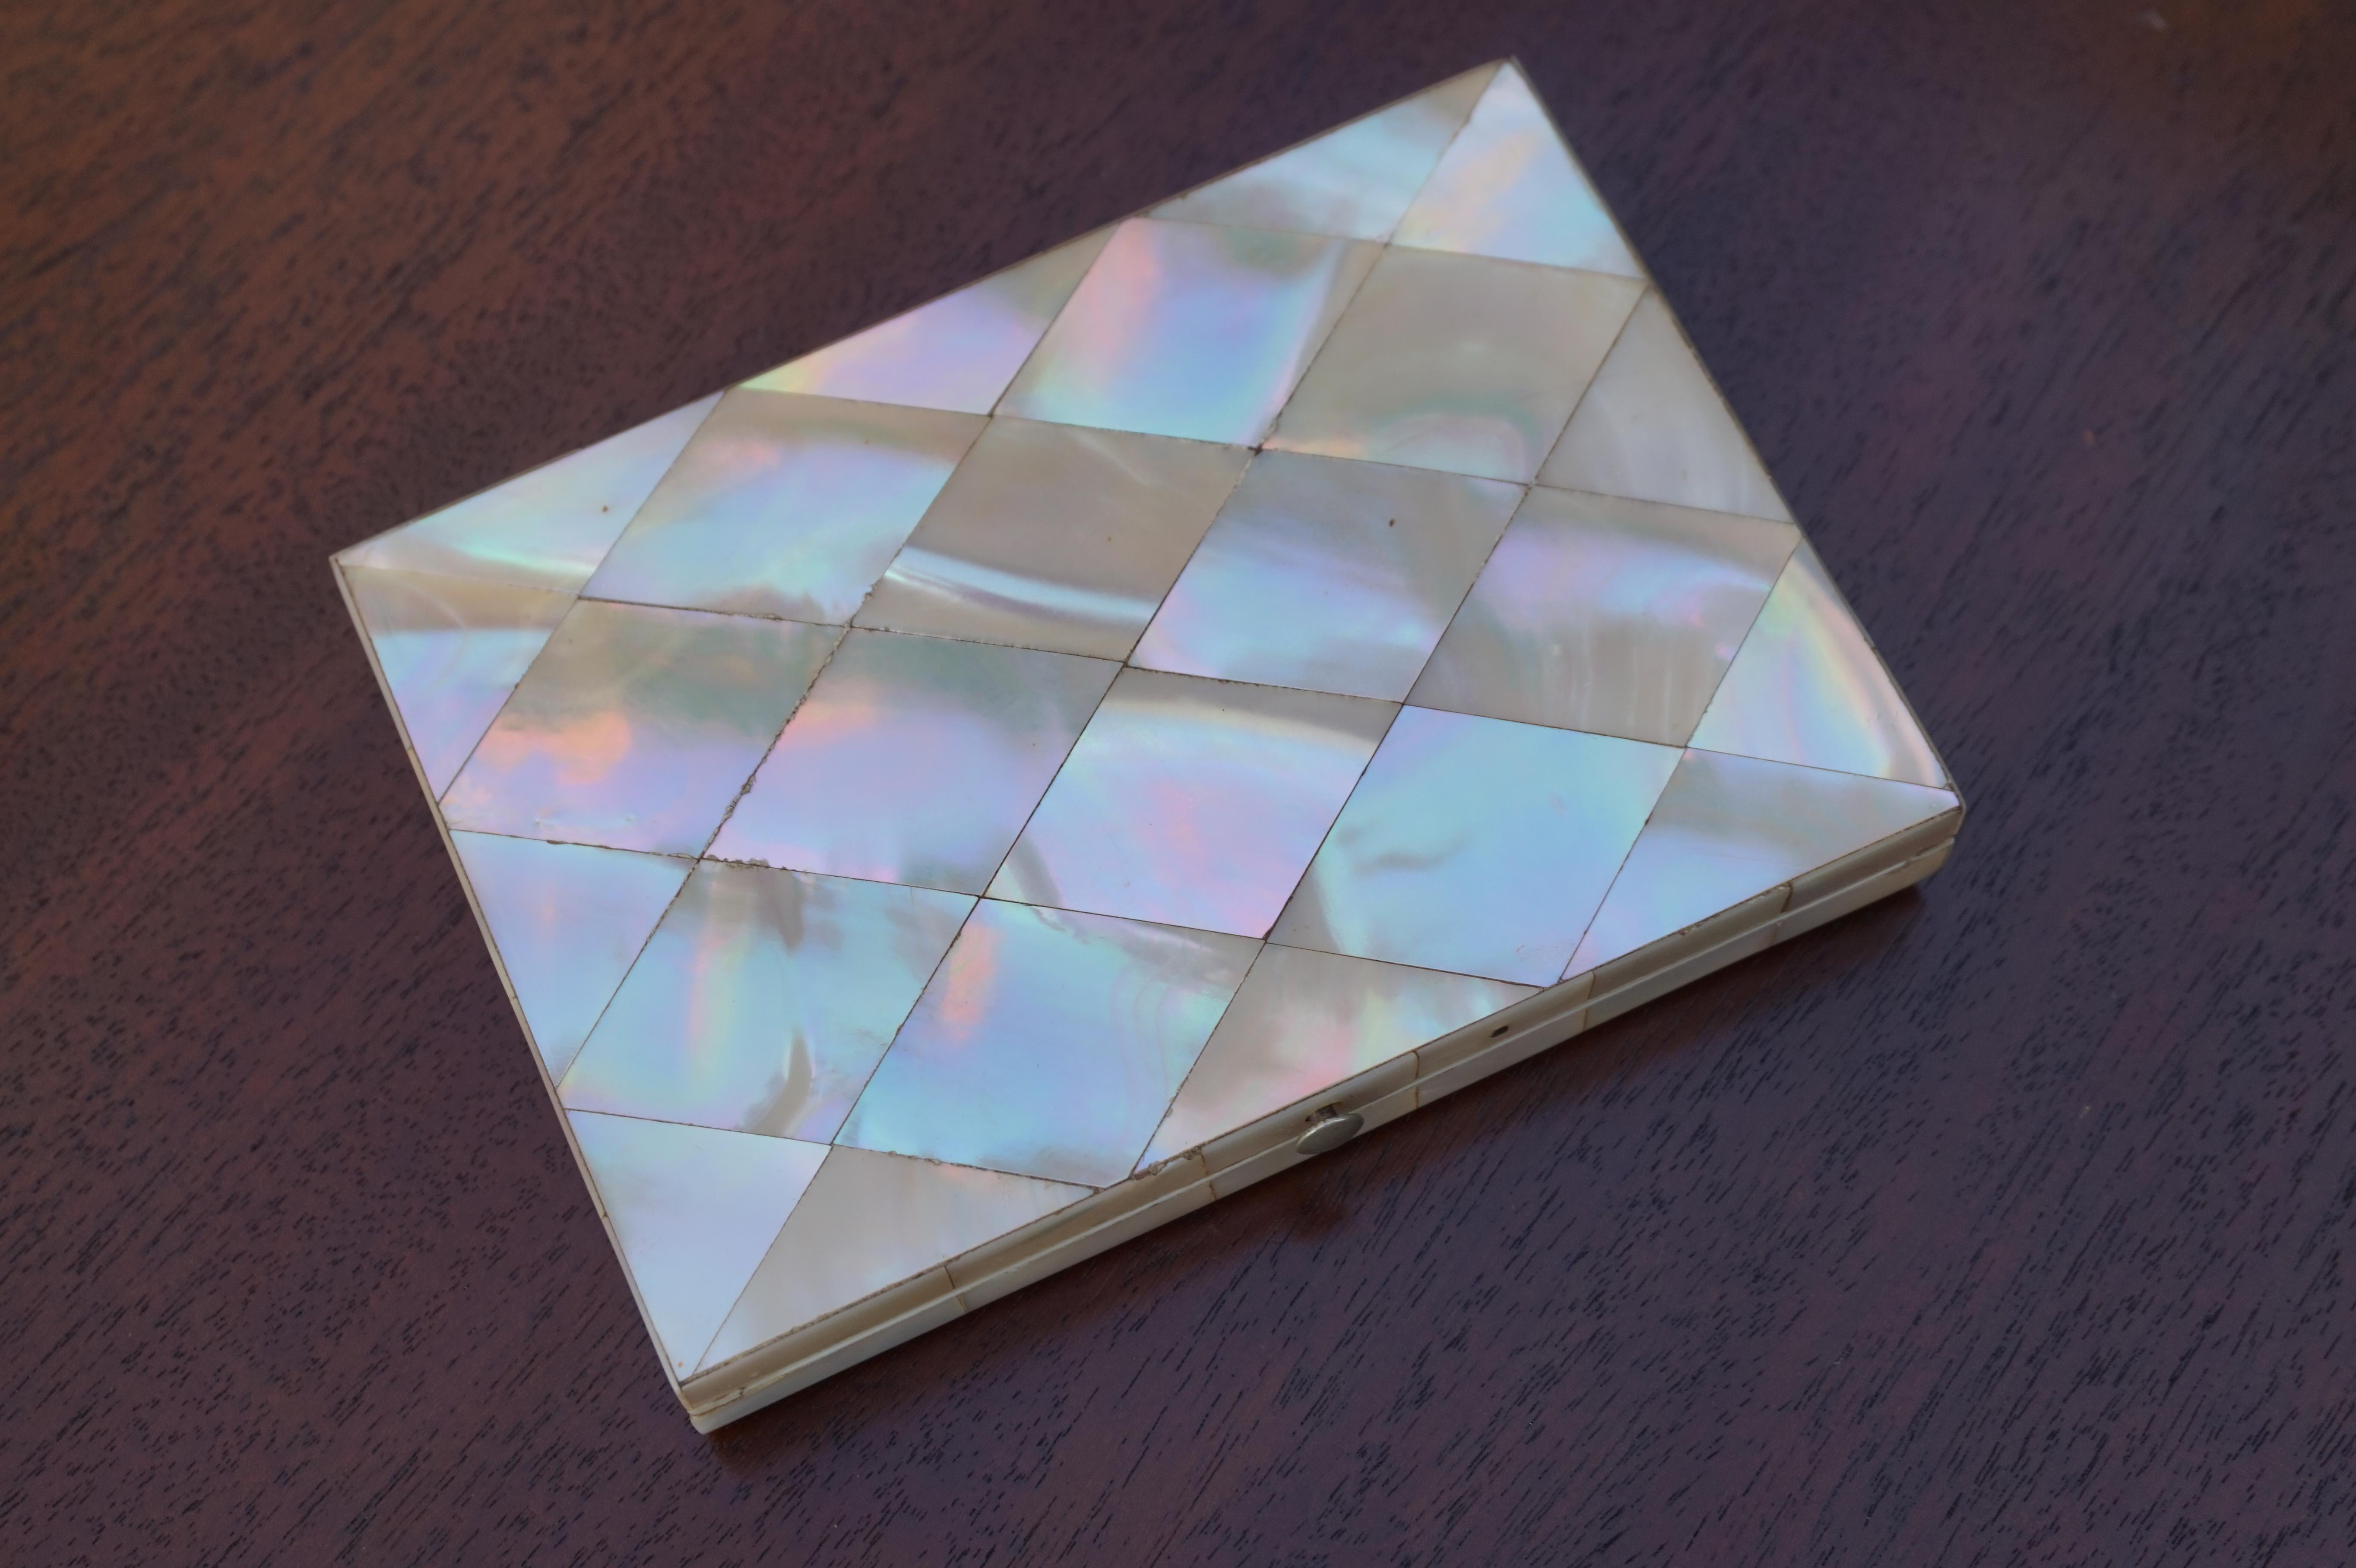 Biedermeier Stunning & Near Mint Condition Mid-19th Century Mother of Pearl Card Case / Box